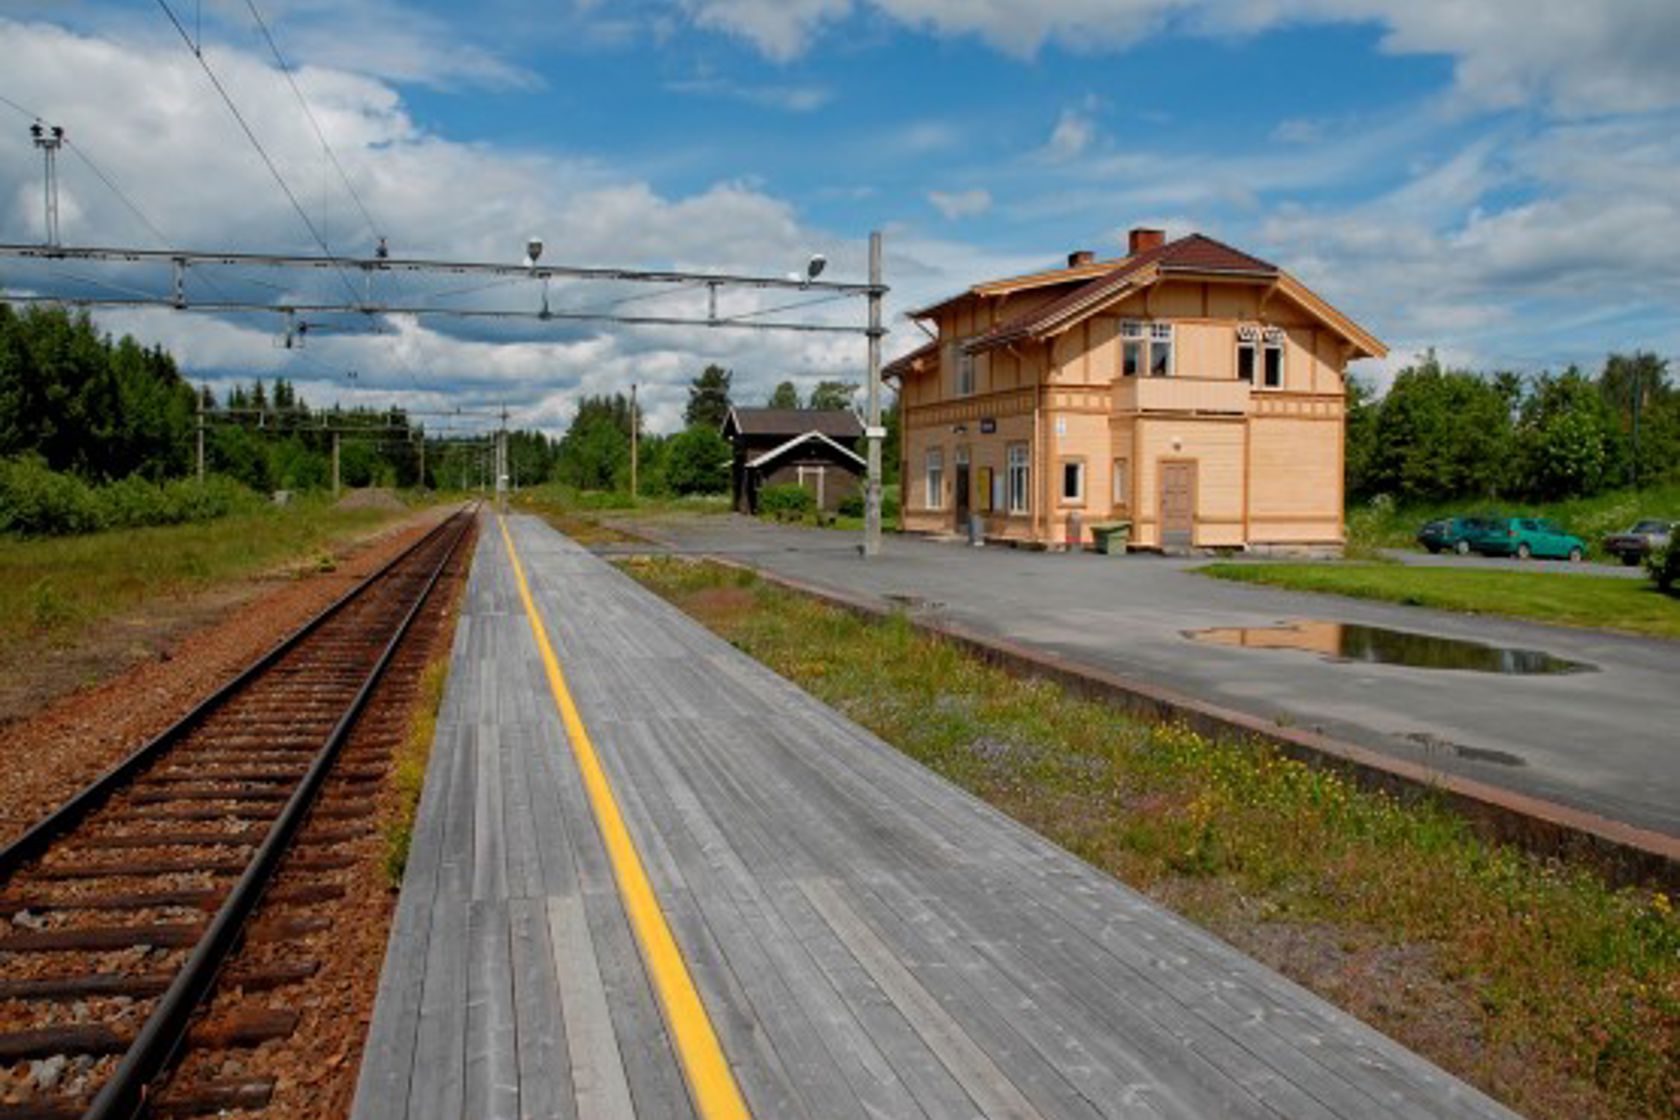 Exterior view of reinsvoll station